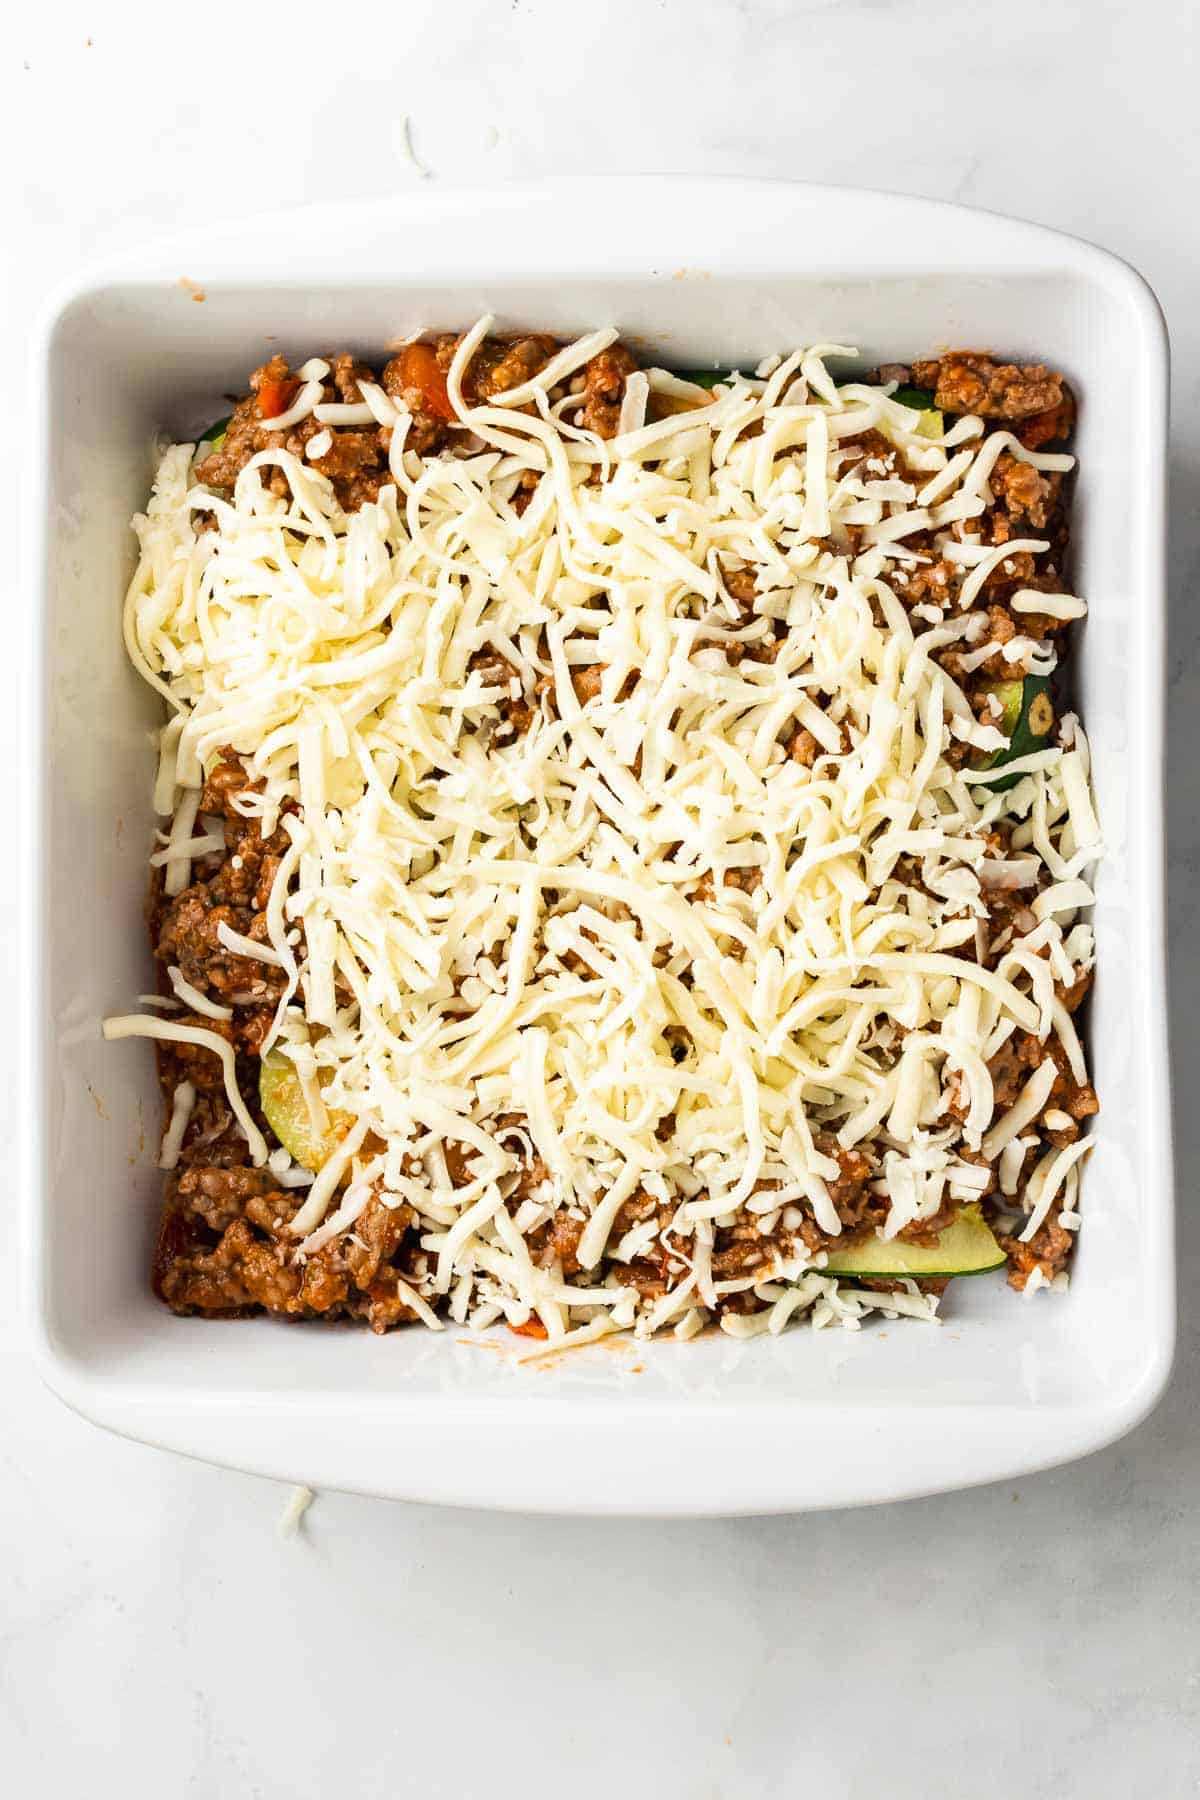 Assembling the lasagna with mozzarella cheese over zucchini slices and the ground beef sauce in a baking pan, as seen from above